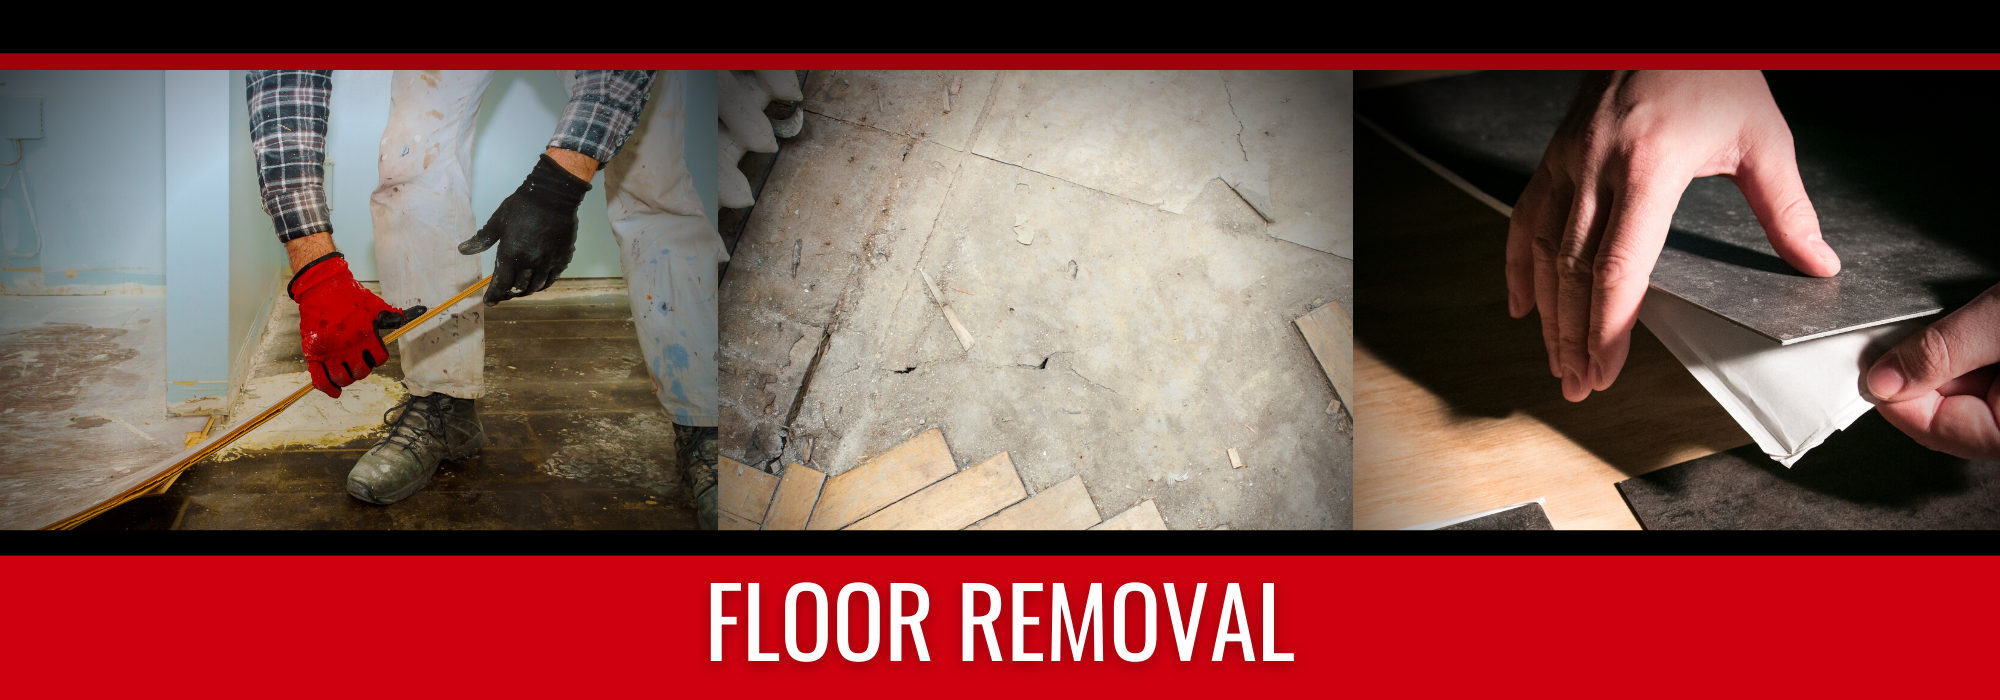 floor removal collage